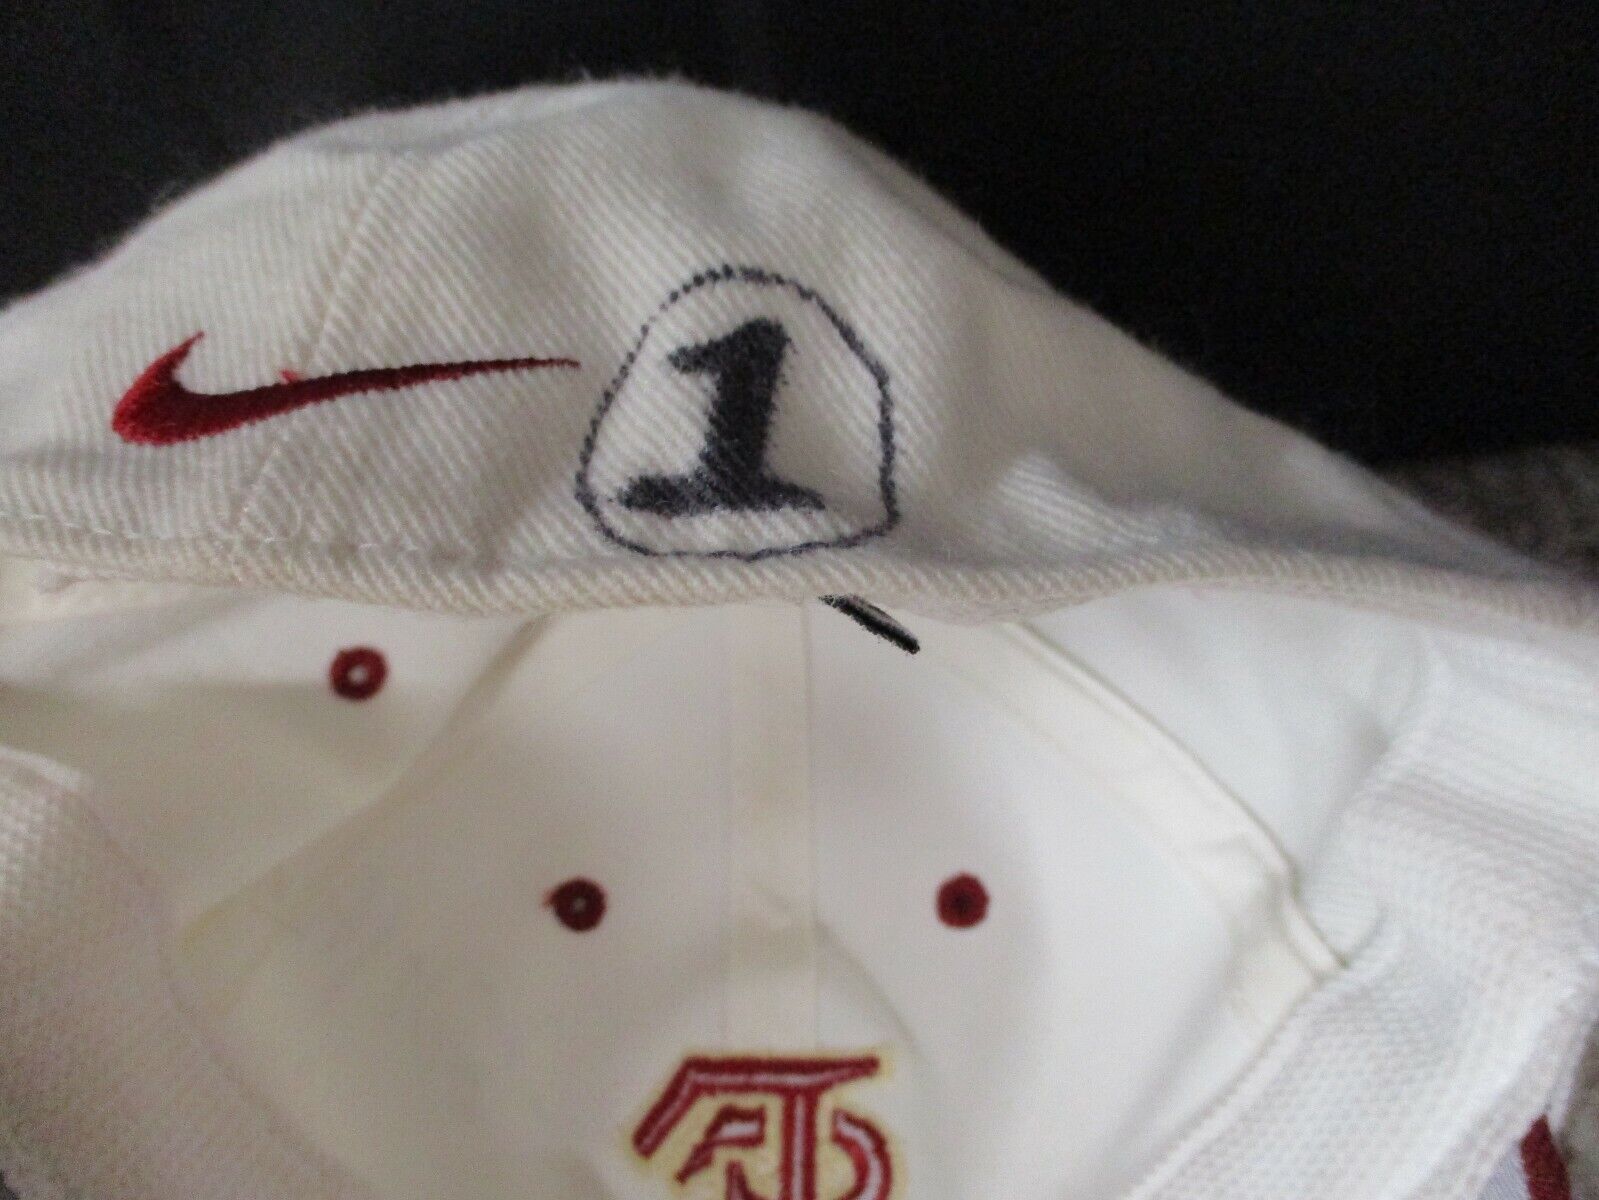 John-Ford Griffin Game Used Autographed Florida State Baseball cap PSA AJ81502